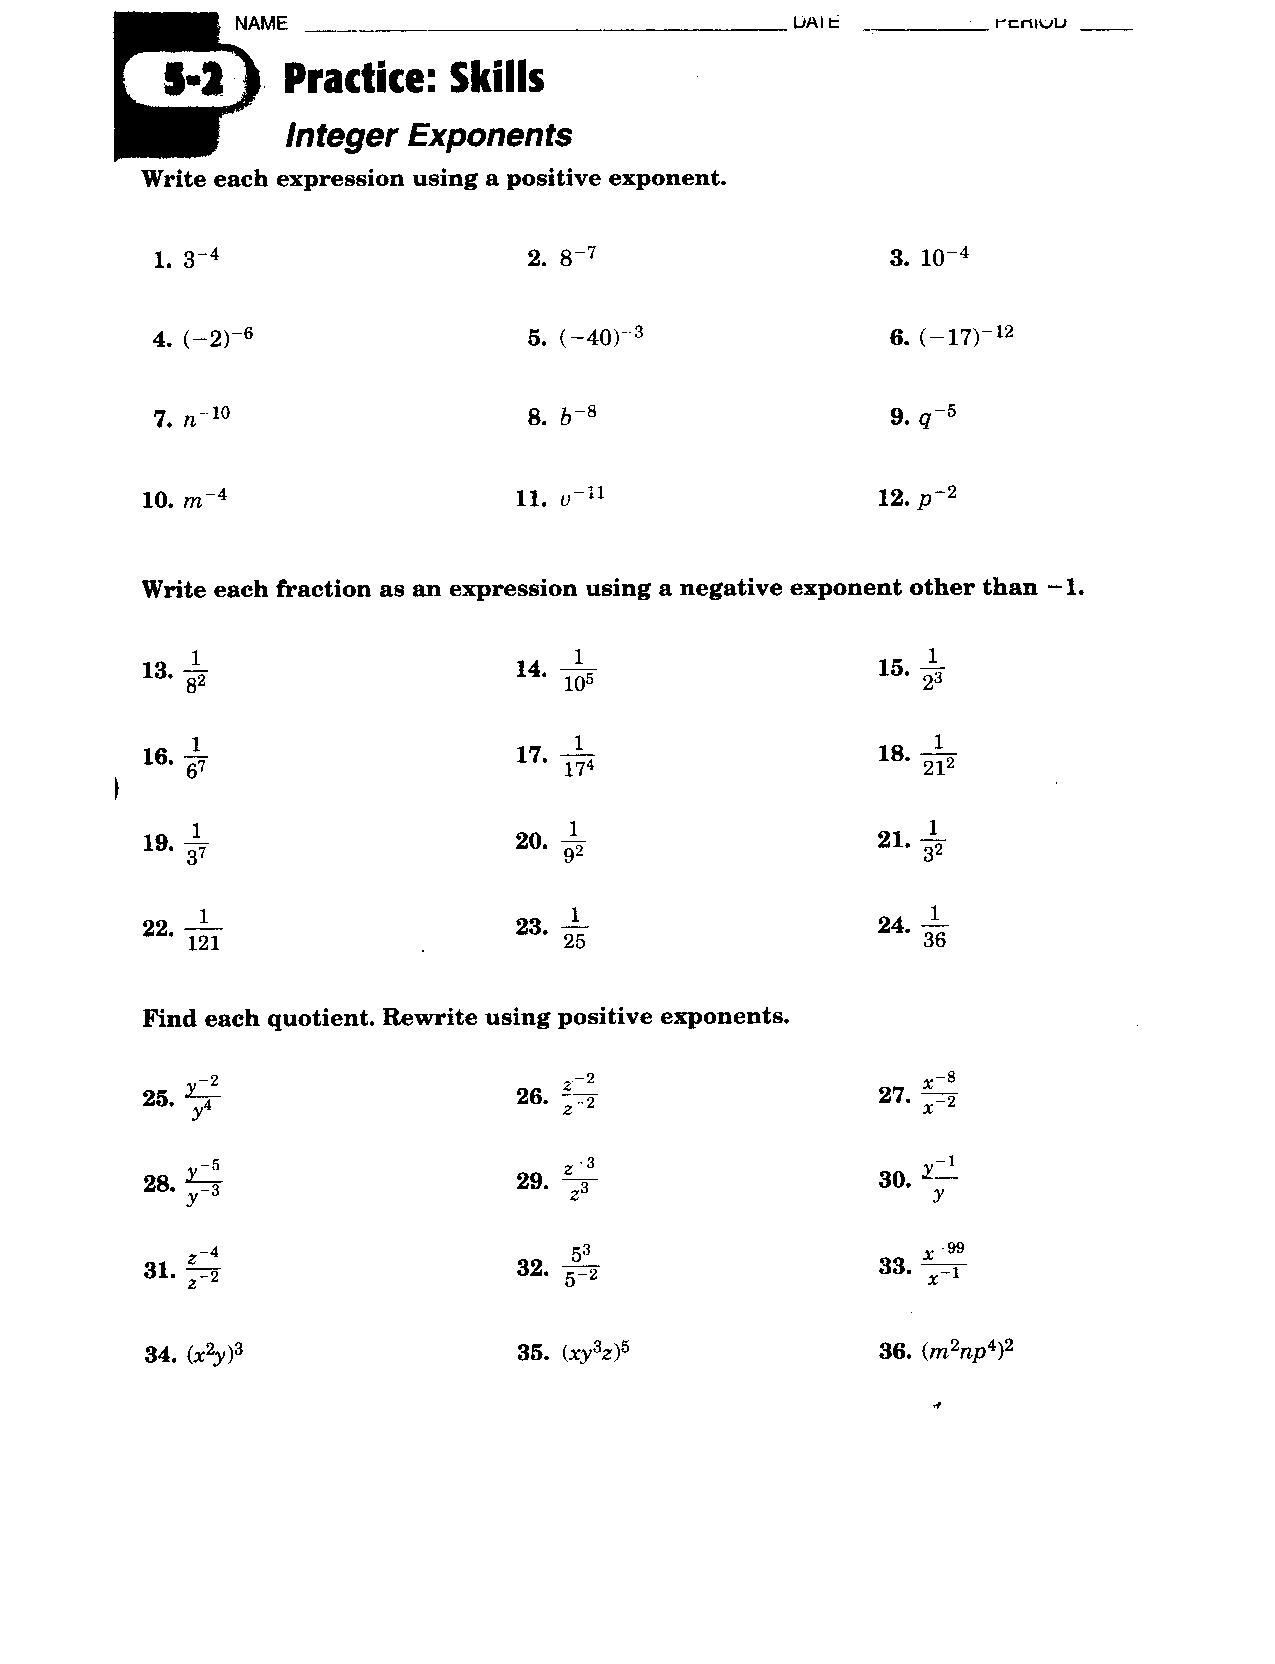 Evaluating Exponential Functions Worksheet Answers